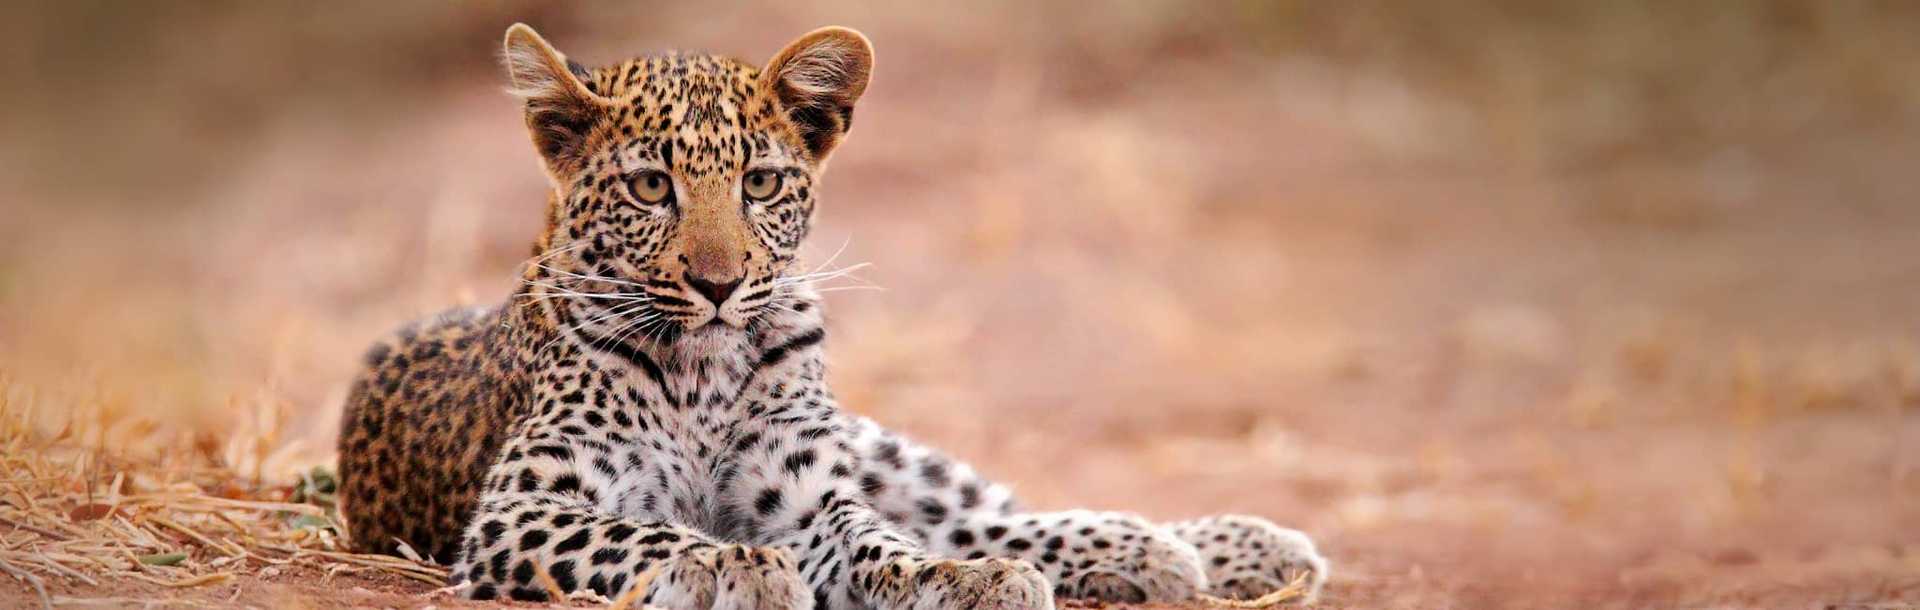 Young African leopard in Hwange National Park, Zimbabwe